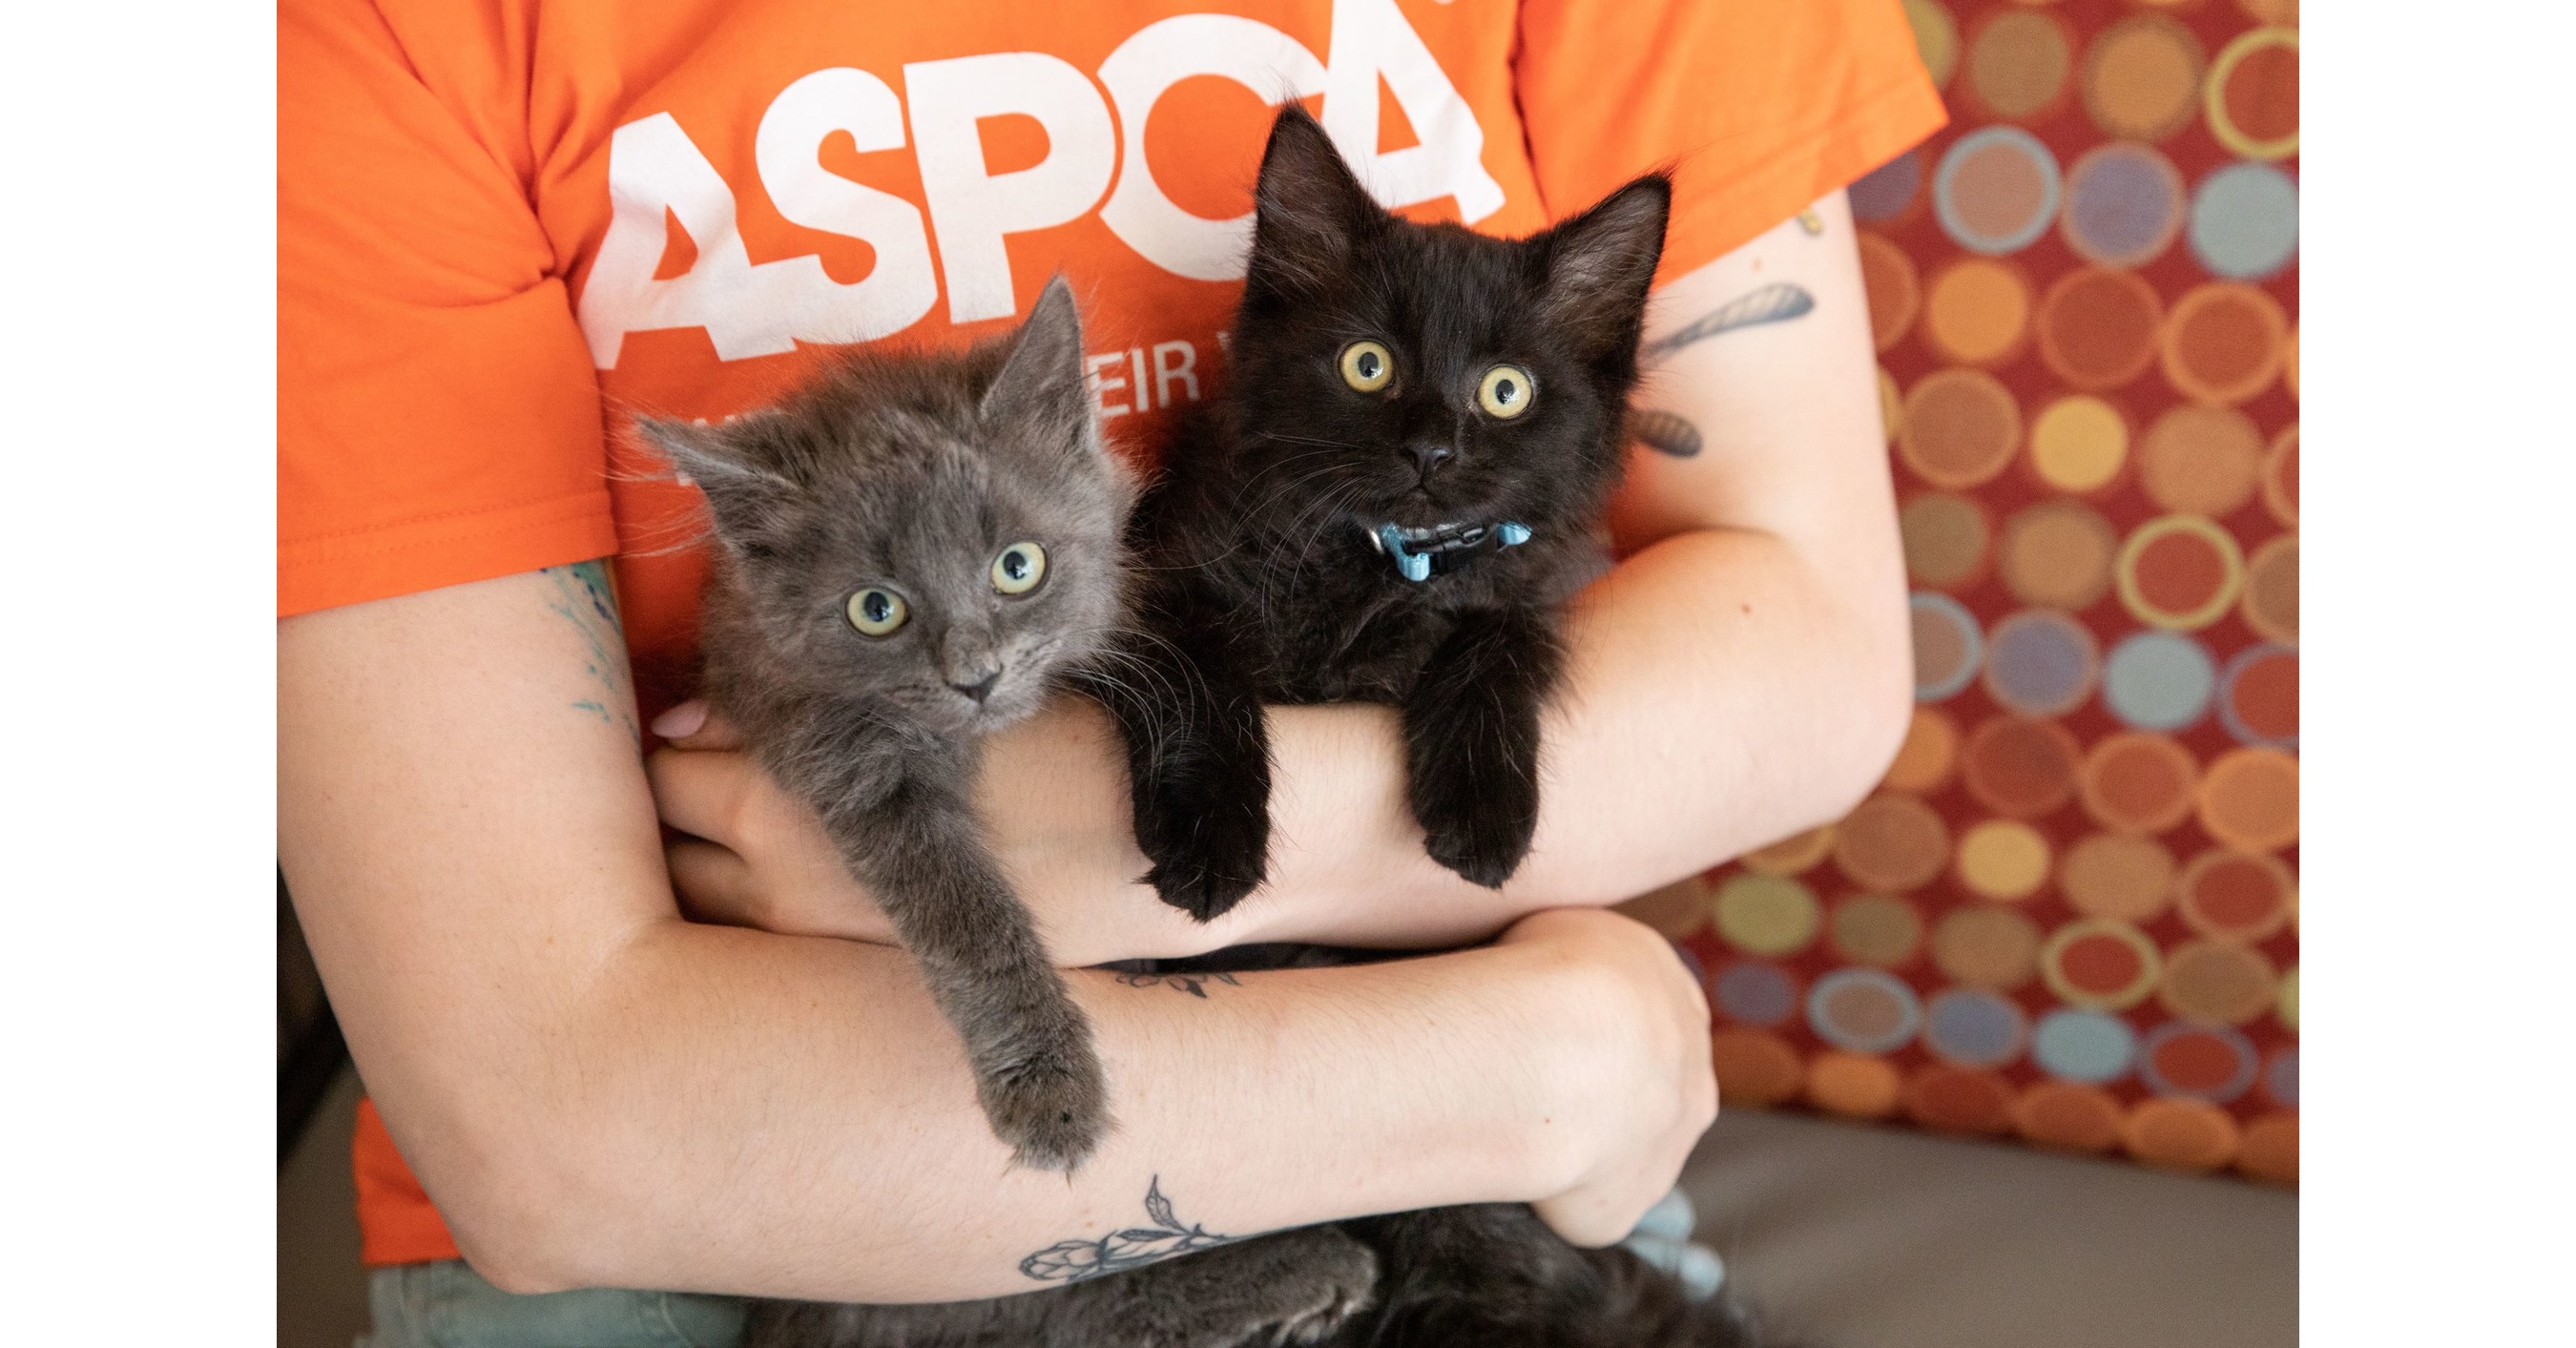 ASPCA Launches National Adoption Weekend Campaign from June 5 7 to